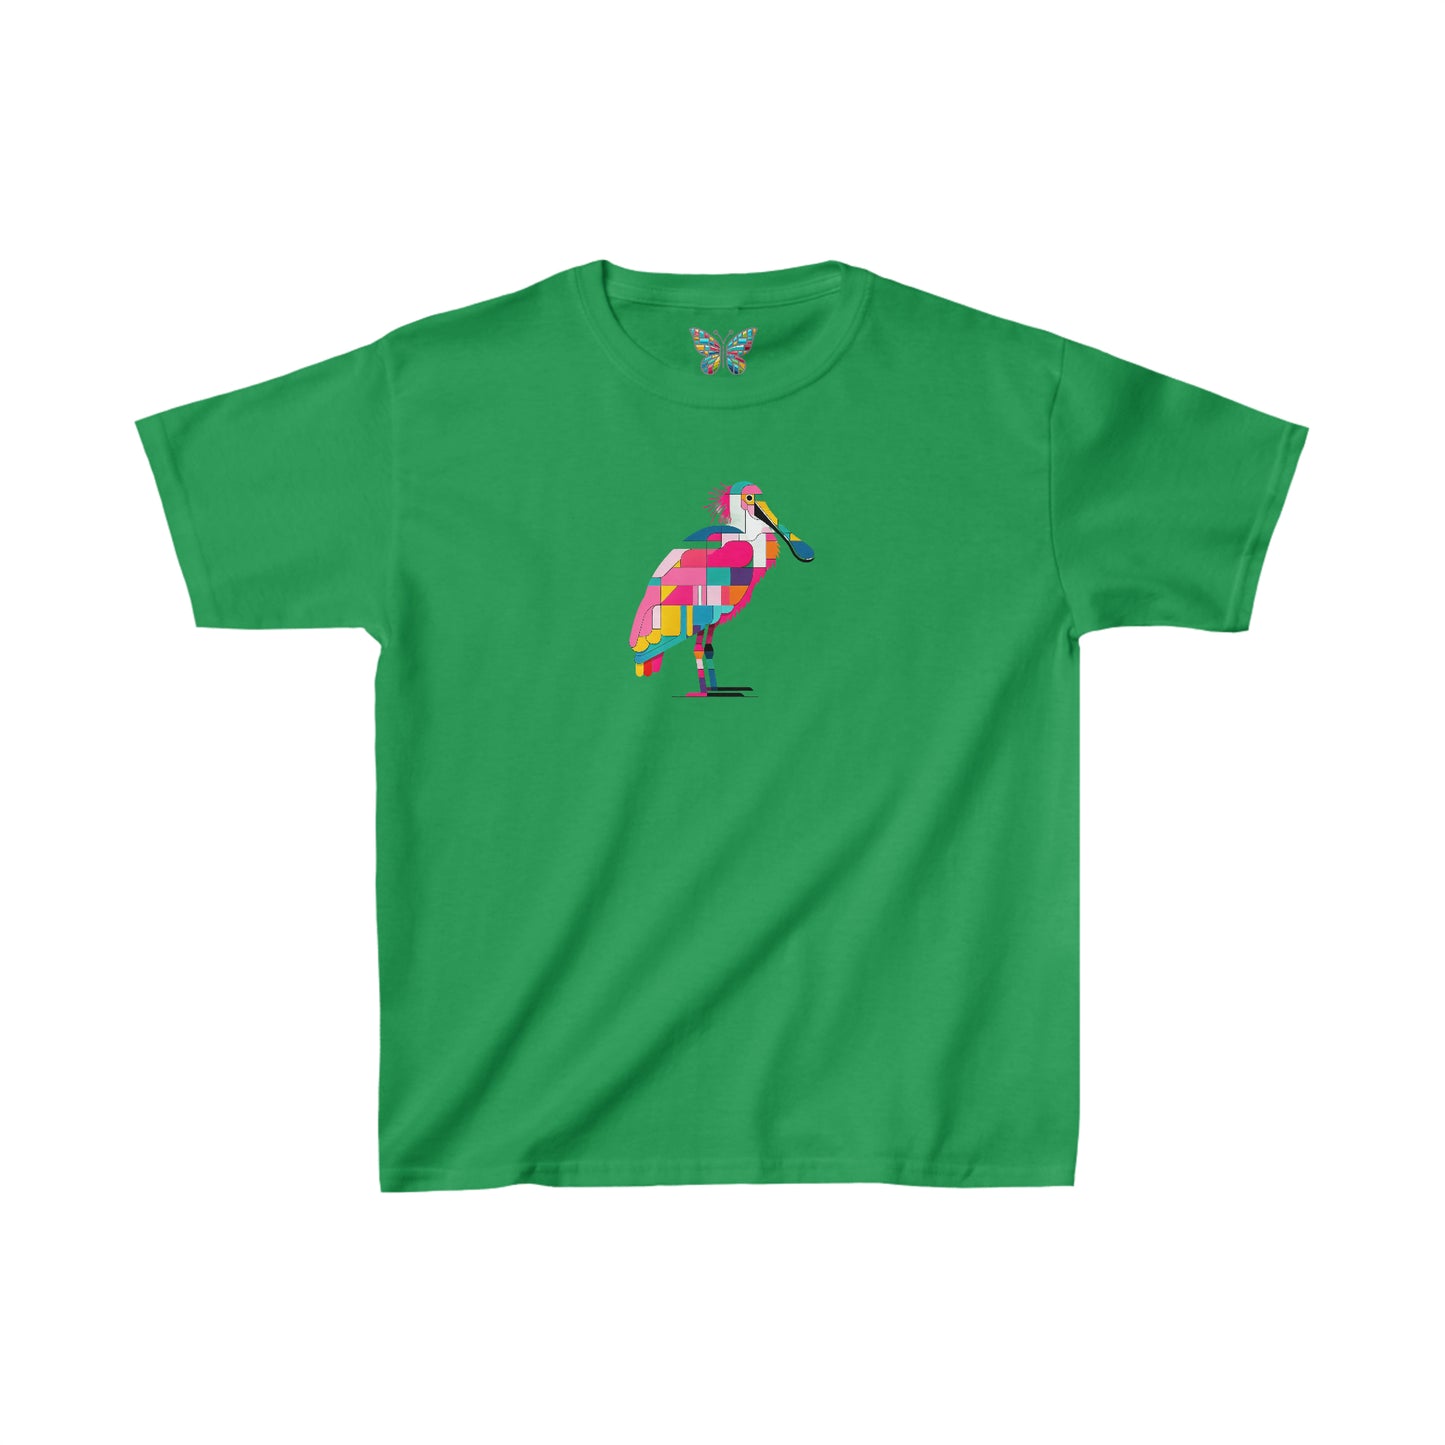 Roseate Spoonbill Jollivex - Youth - Snazzle Tee